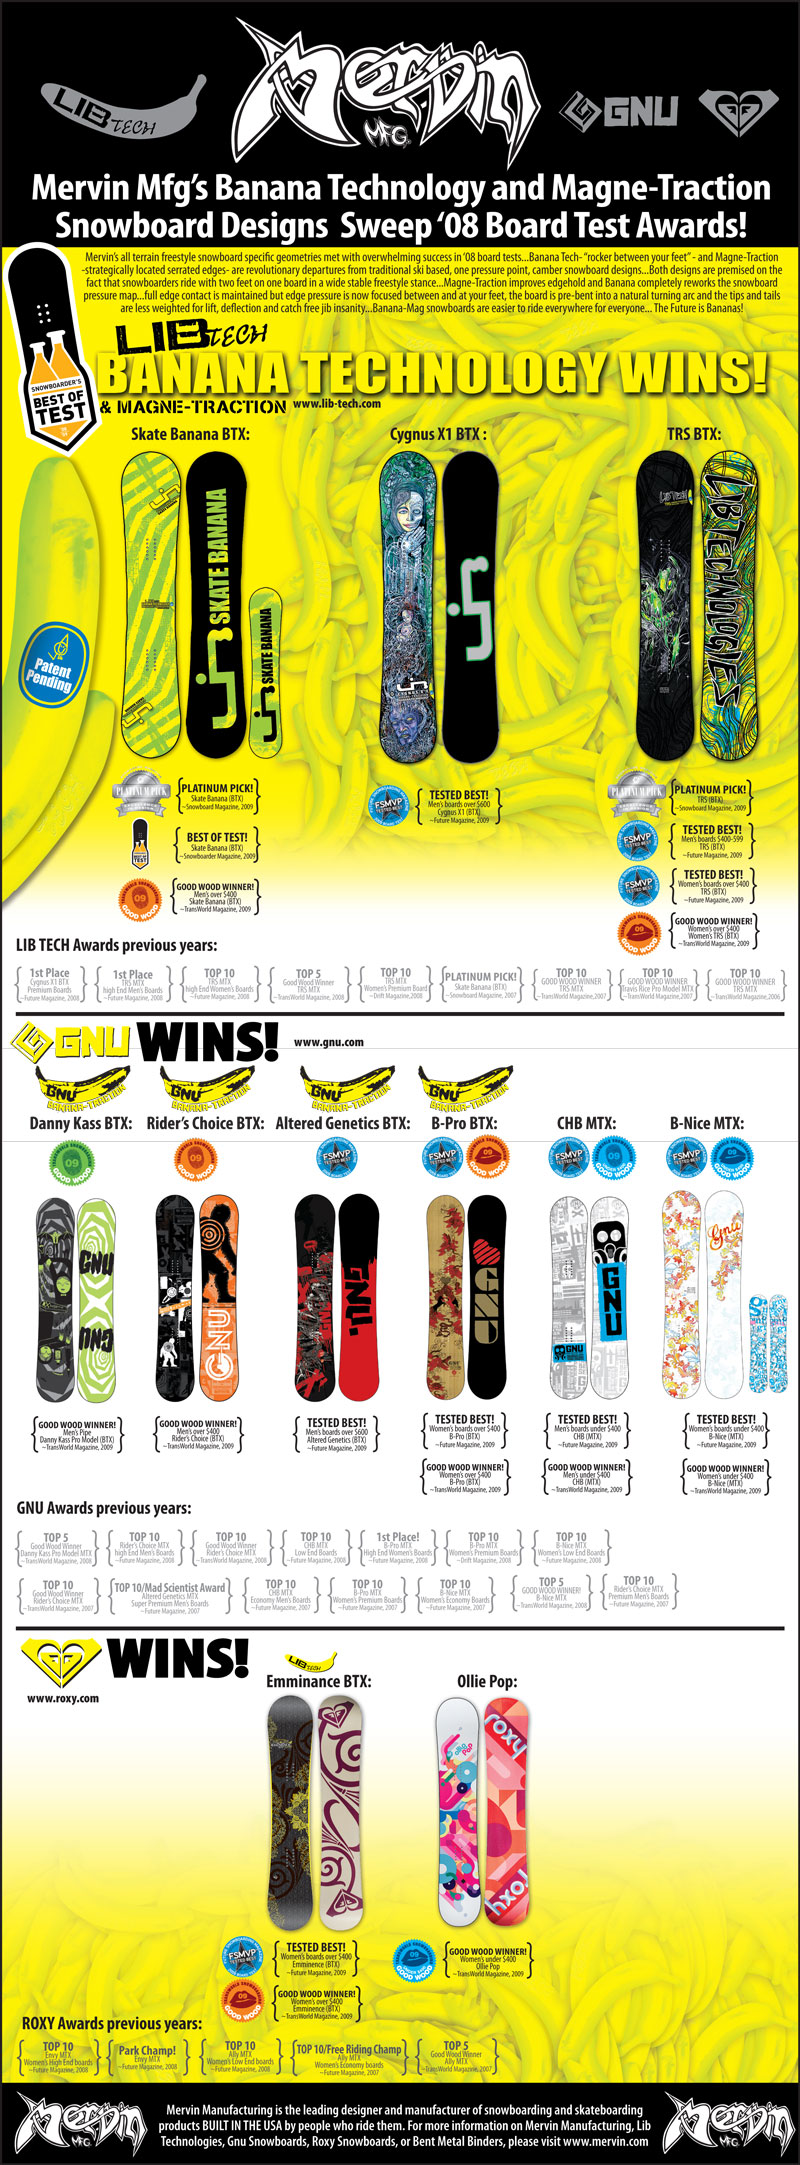 Mervin Mfg’s Banana Technology and Magne-Traction Snowboard Designs Sweep ‘08 Board Test Awards!